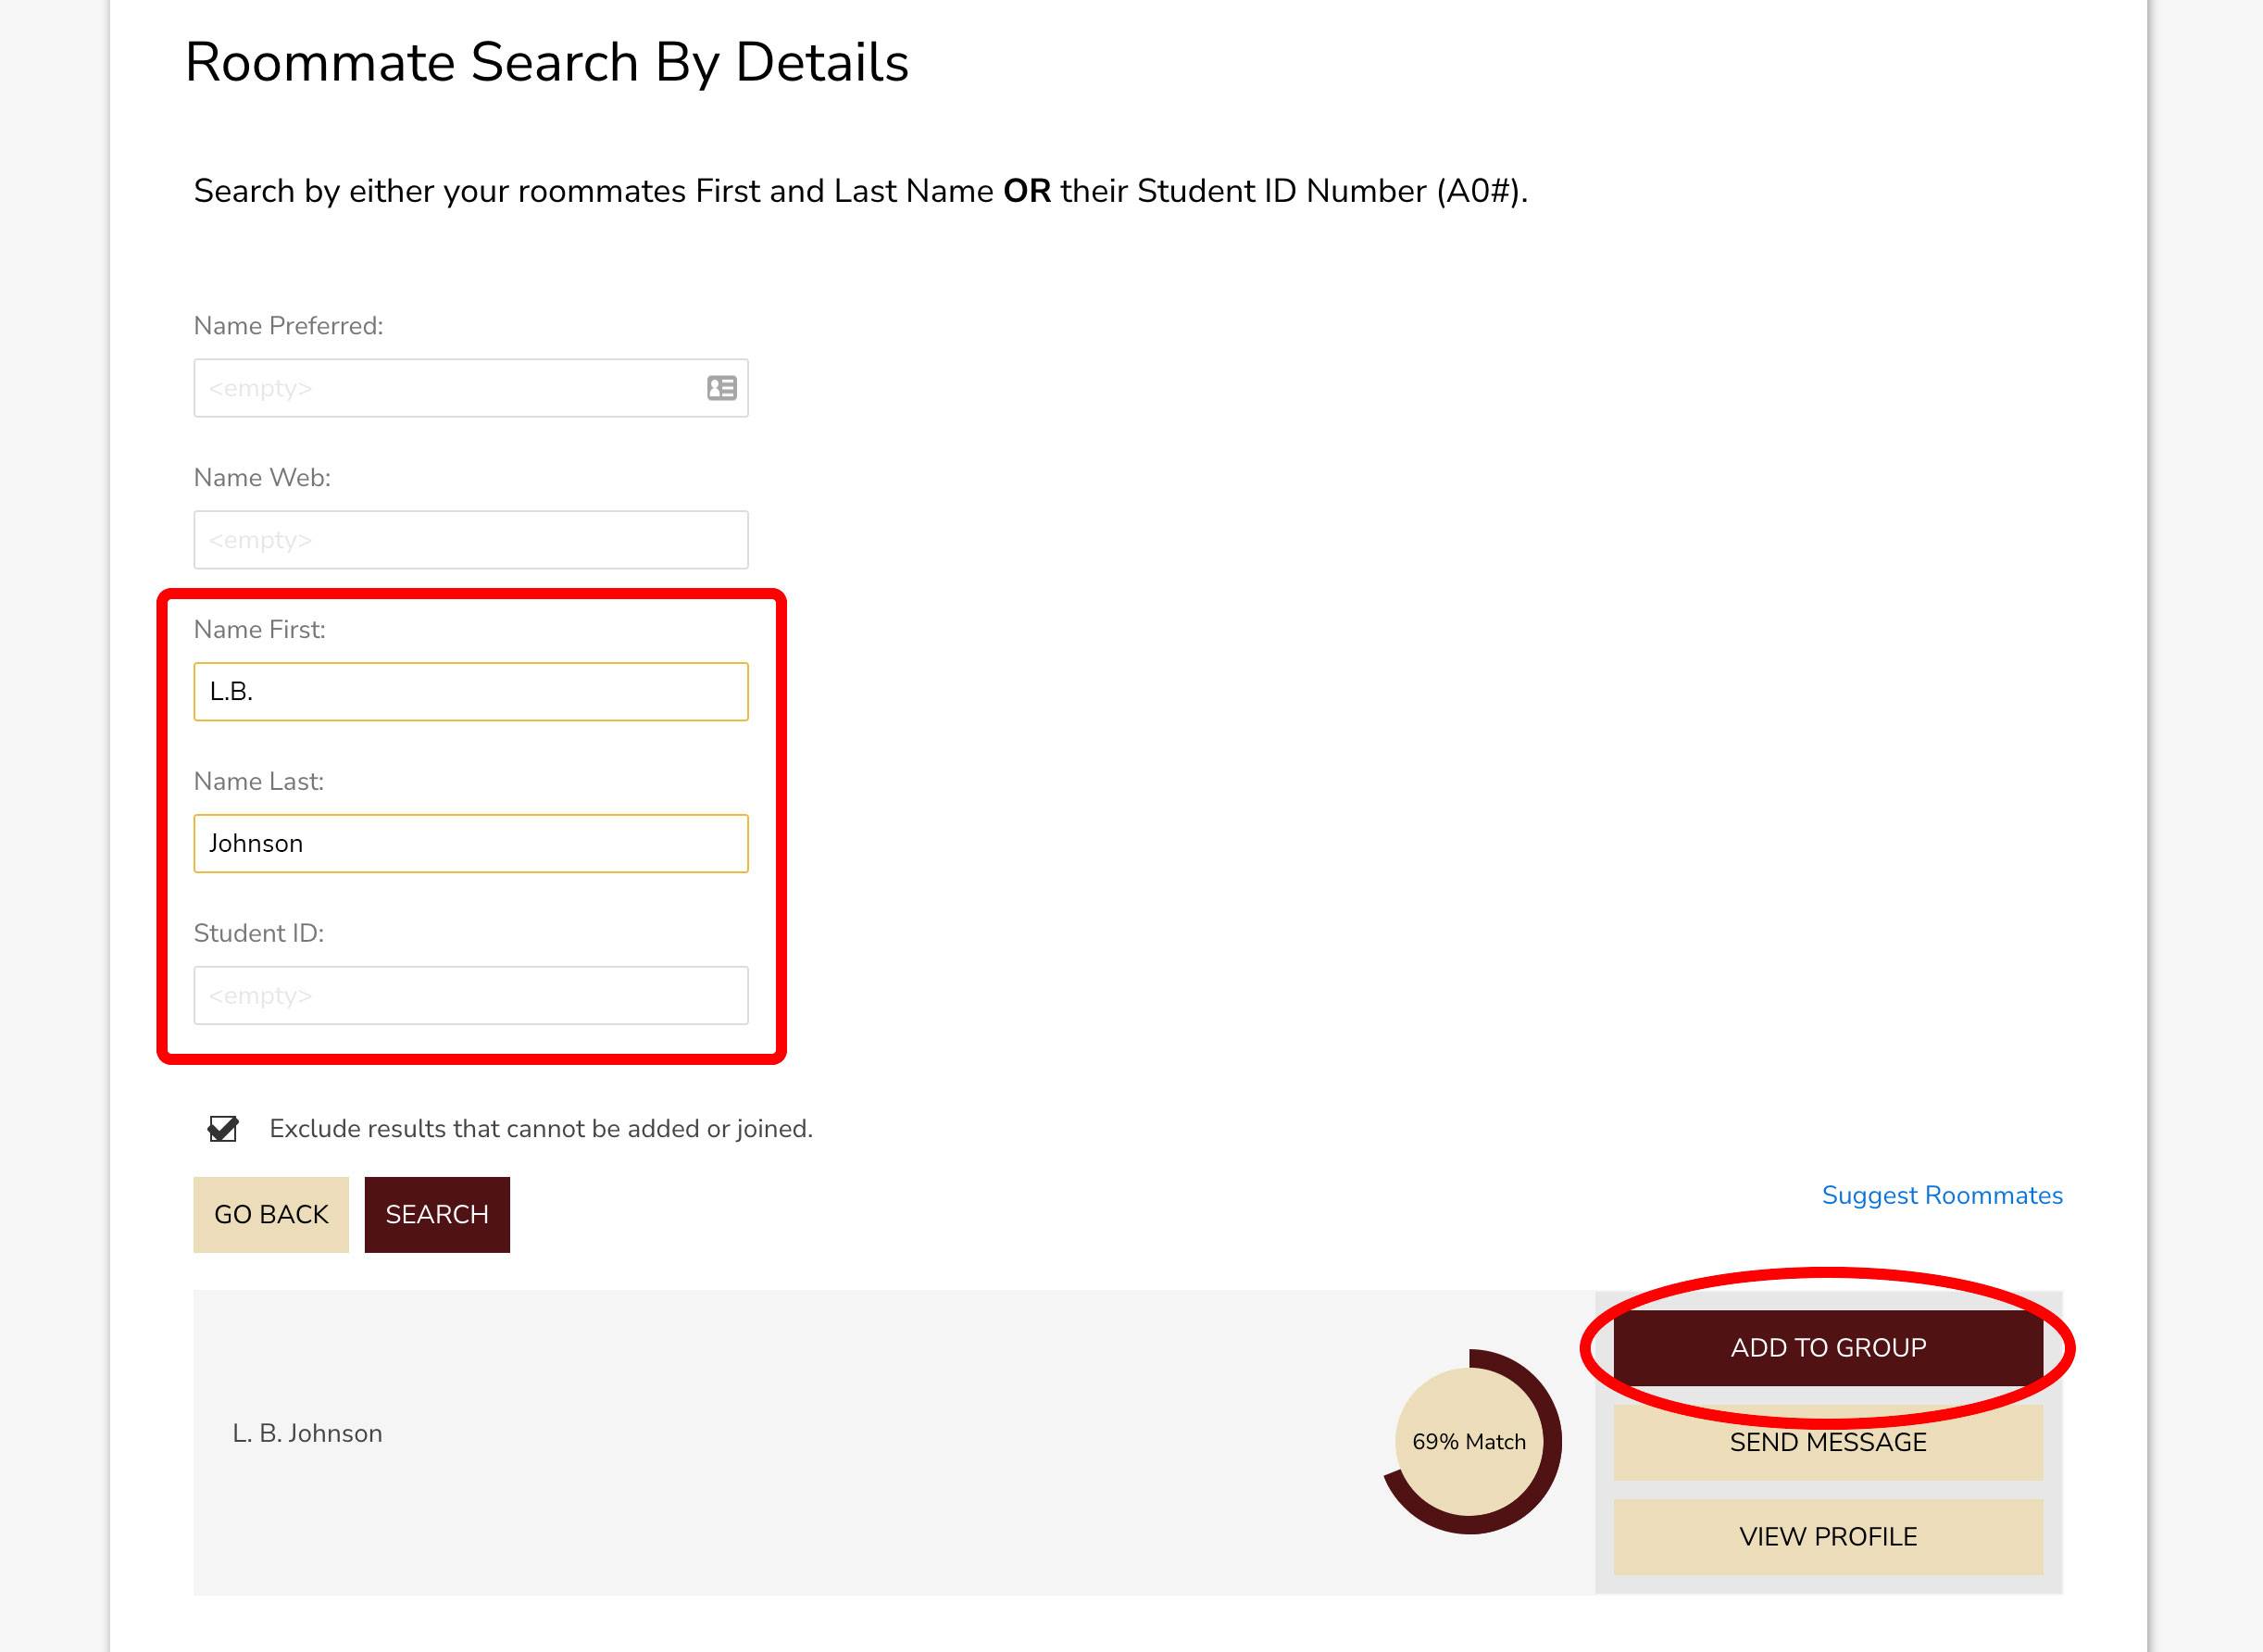 Screenshot of Roommate Search by Details page in the Housing Portal.